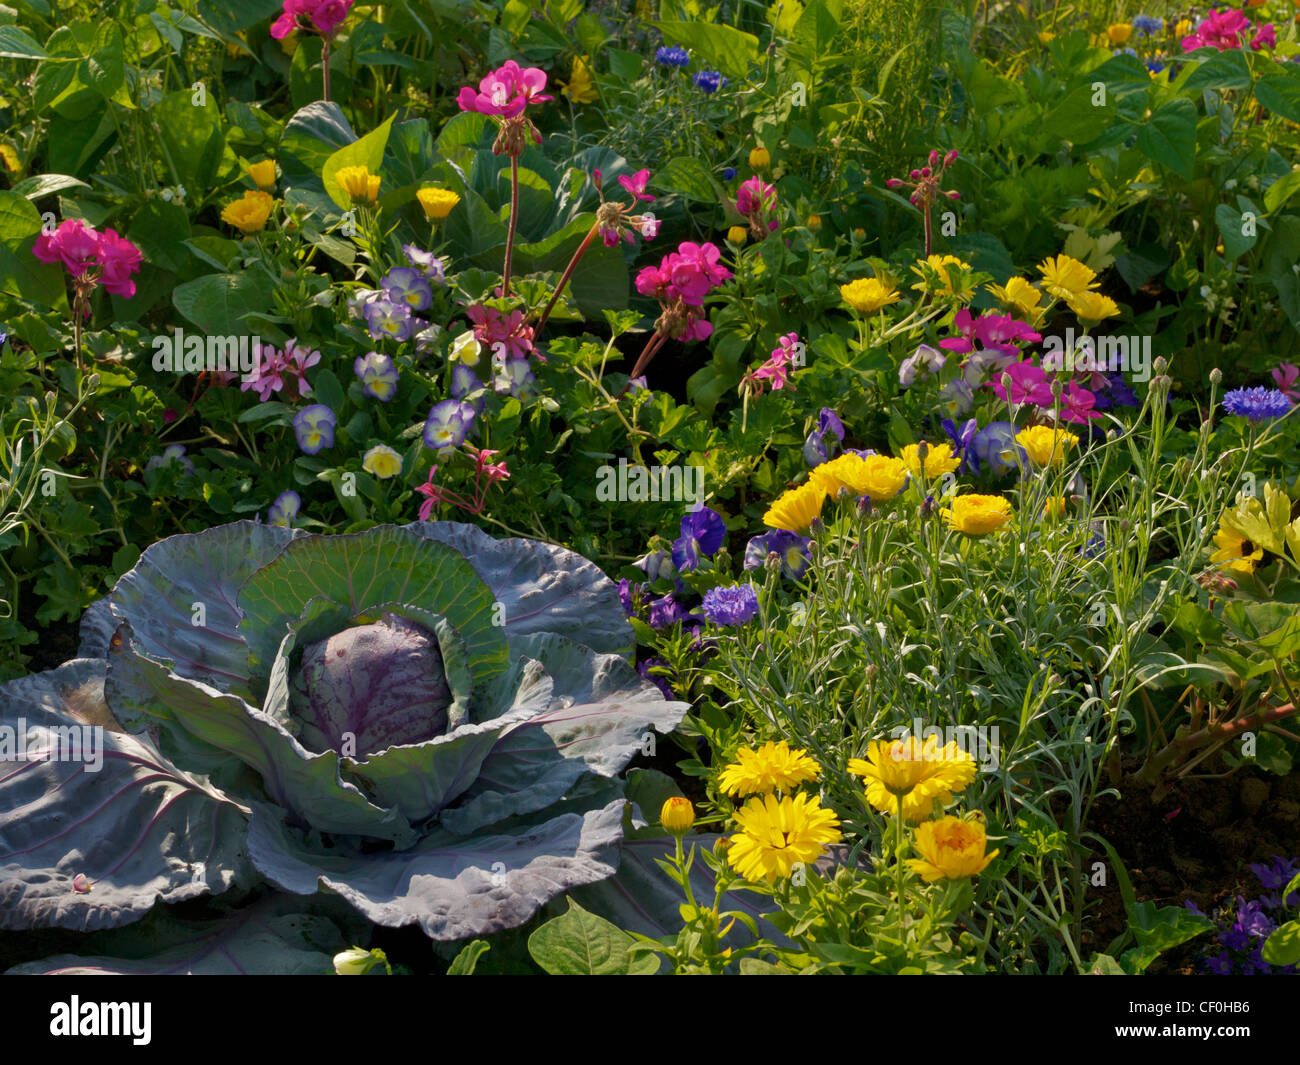 Sunlit Potager with cabbage January King and summer bedding Stock Photo